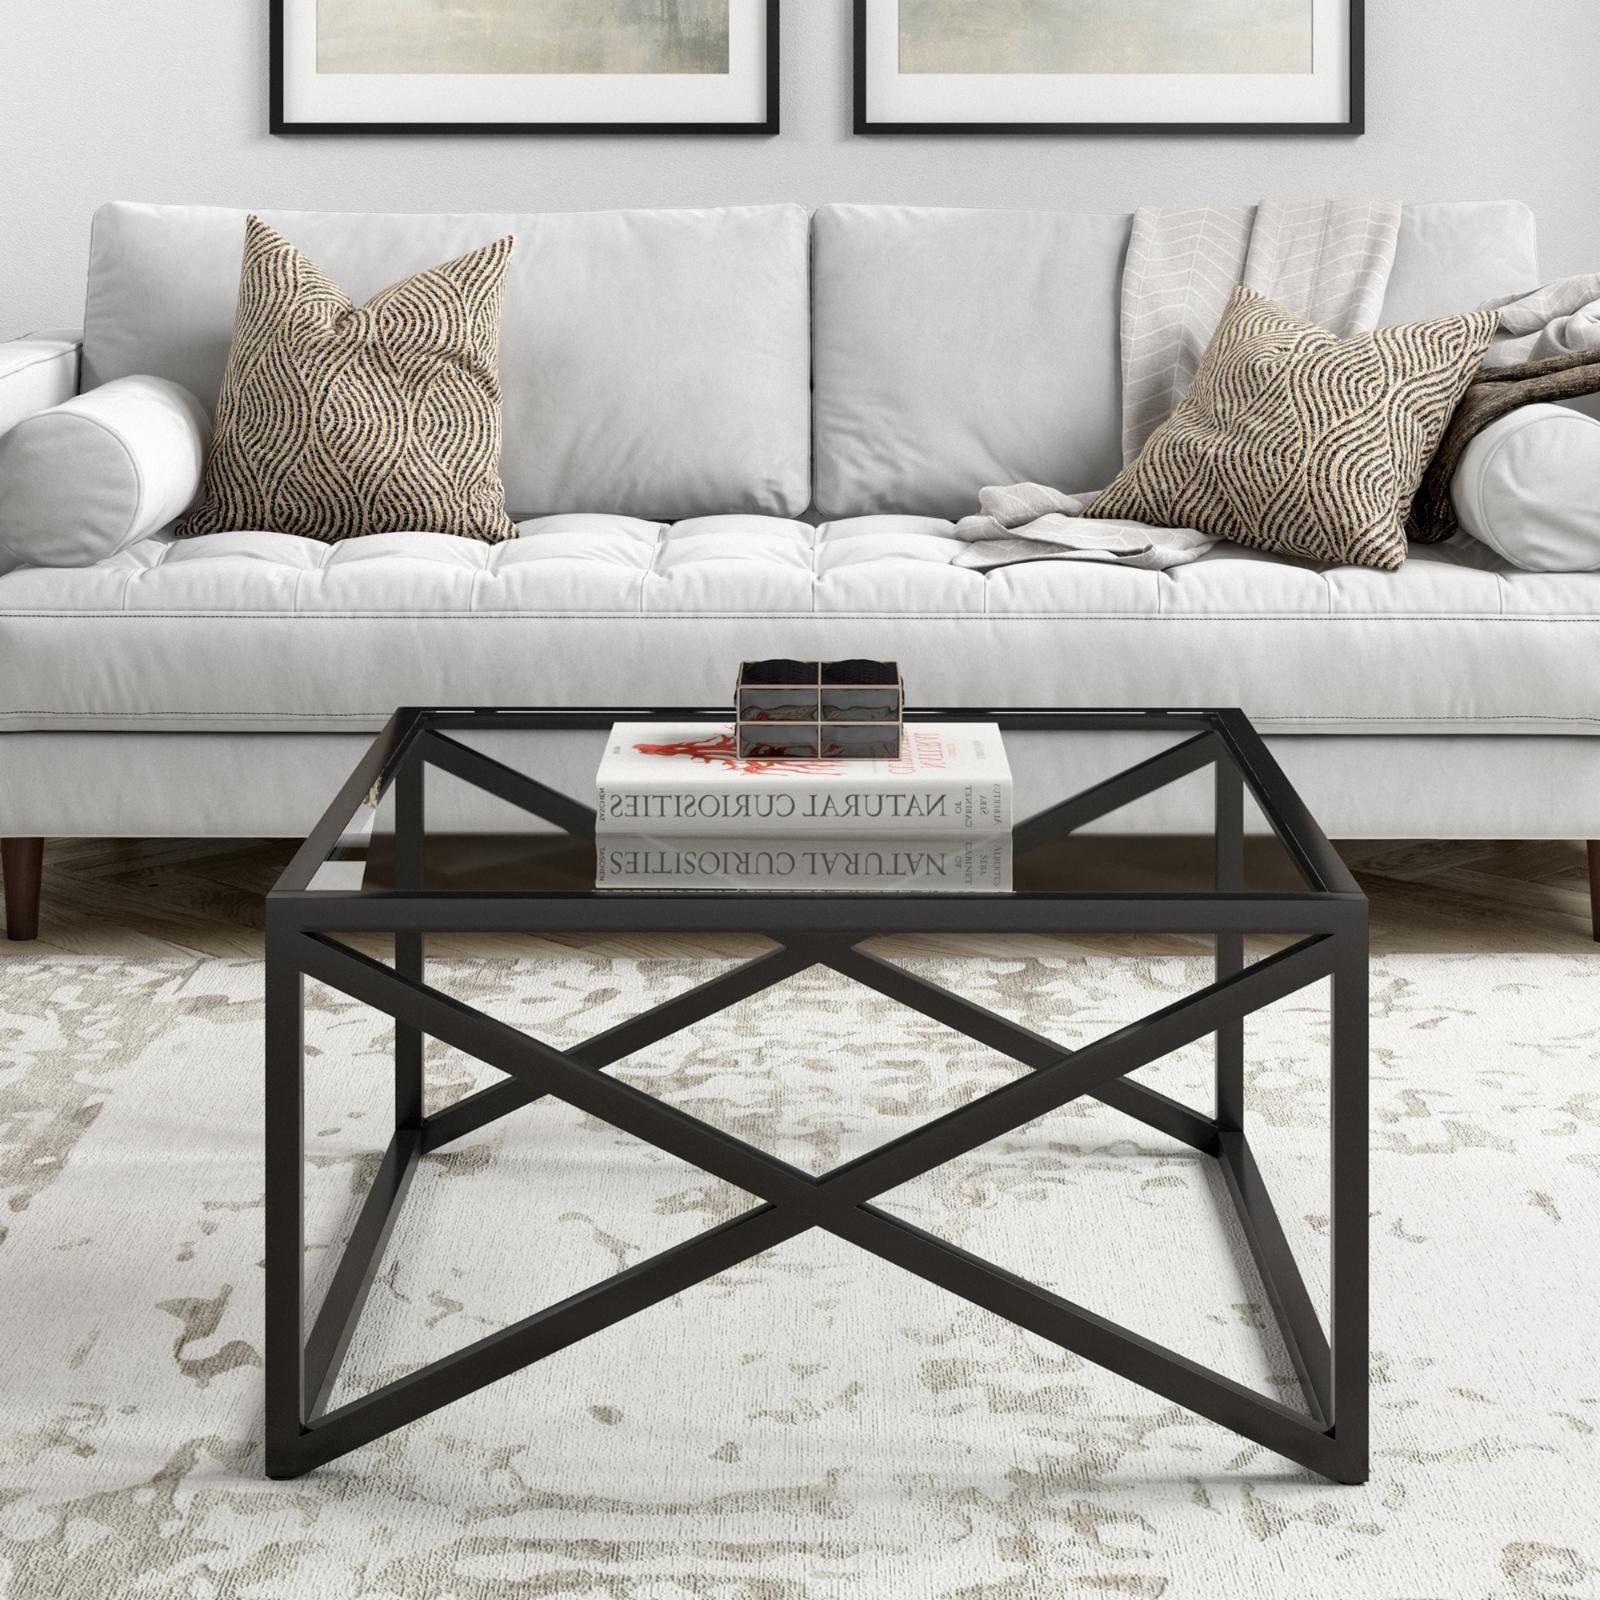 Addison&lane Calix Square Coffee Table – Walmart With Regard To Widely Used Addison&lane Calix Square Tables (Photo 4 of 10)